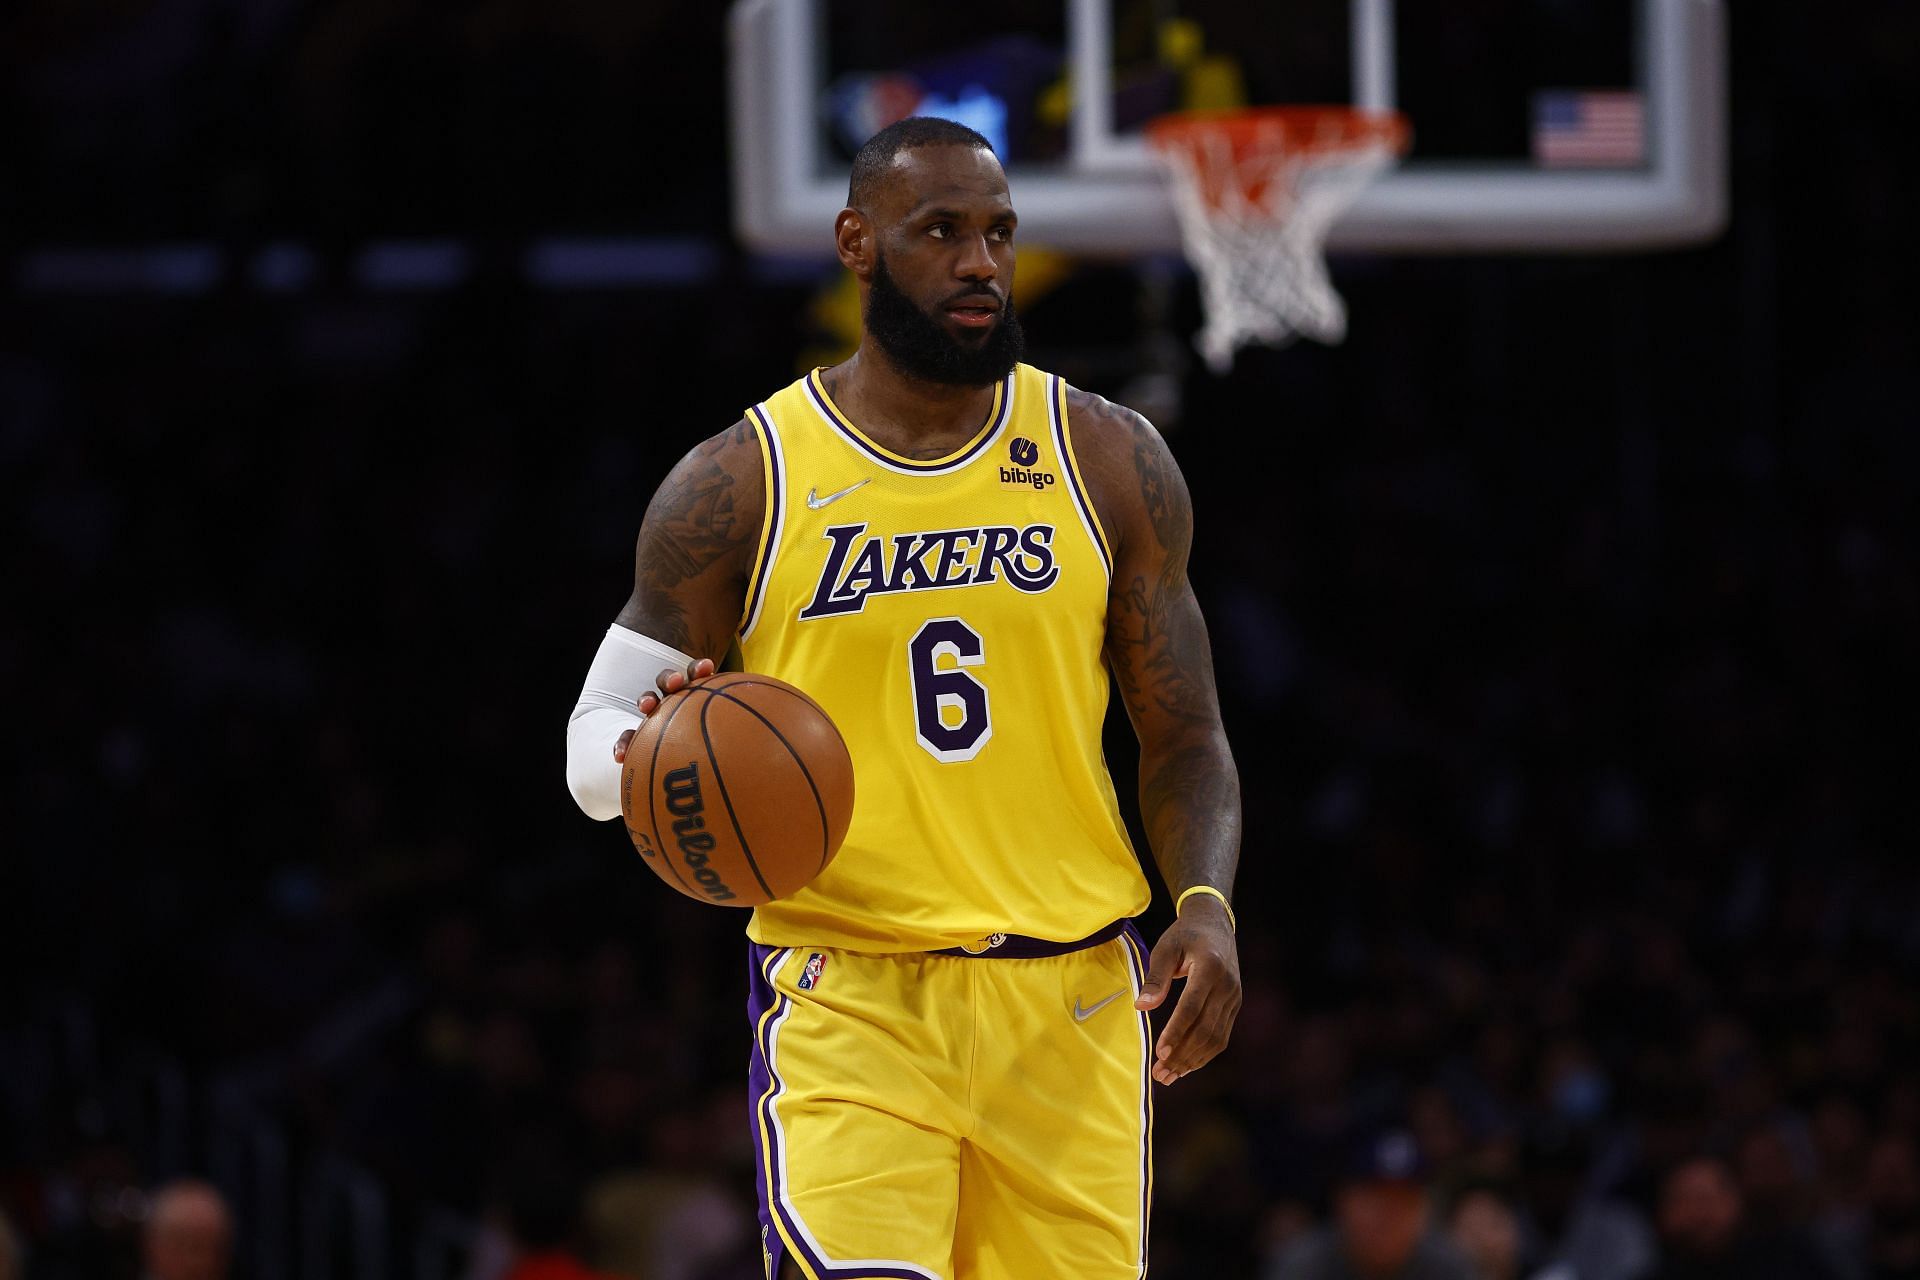 LeBron James of the LA Lakers at Crypto.com Arena on Tuesday in Los Angeles, California